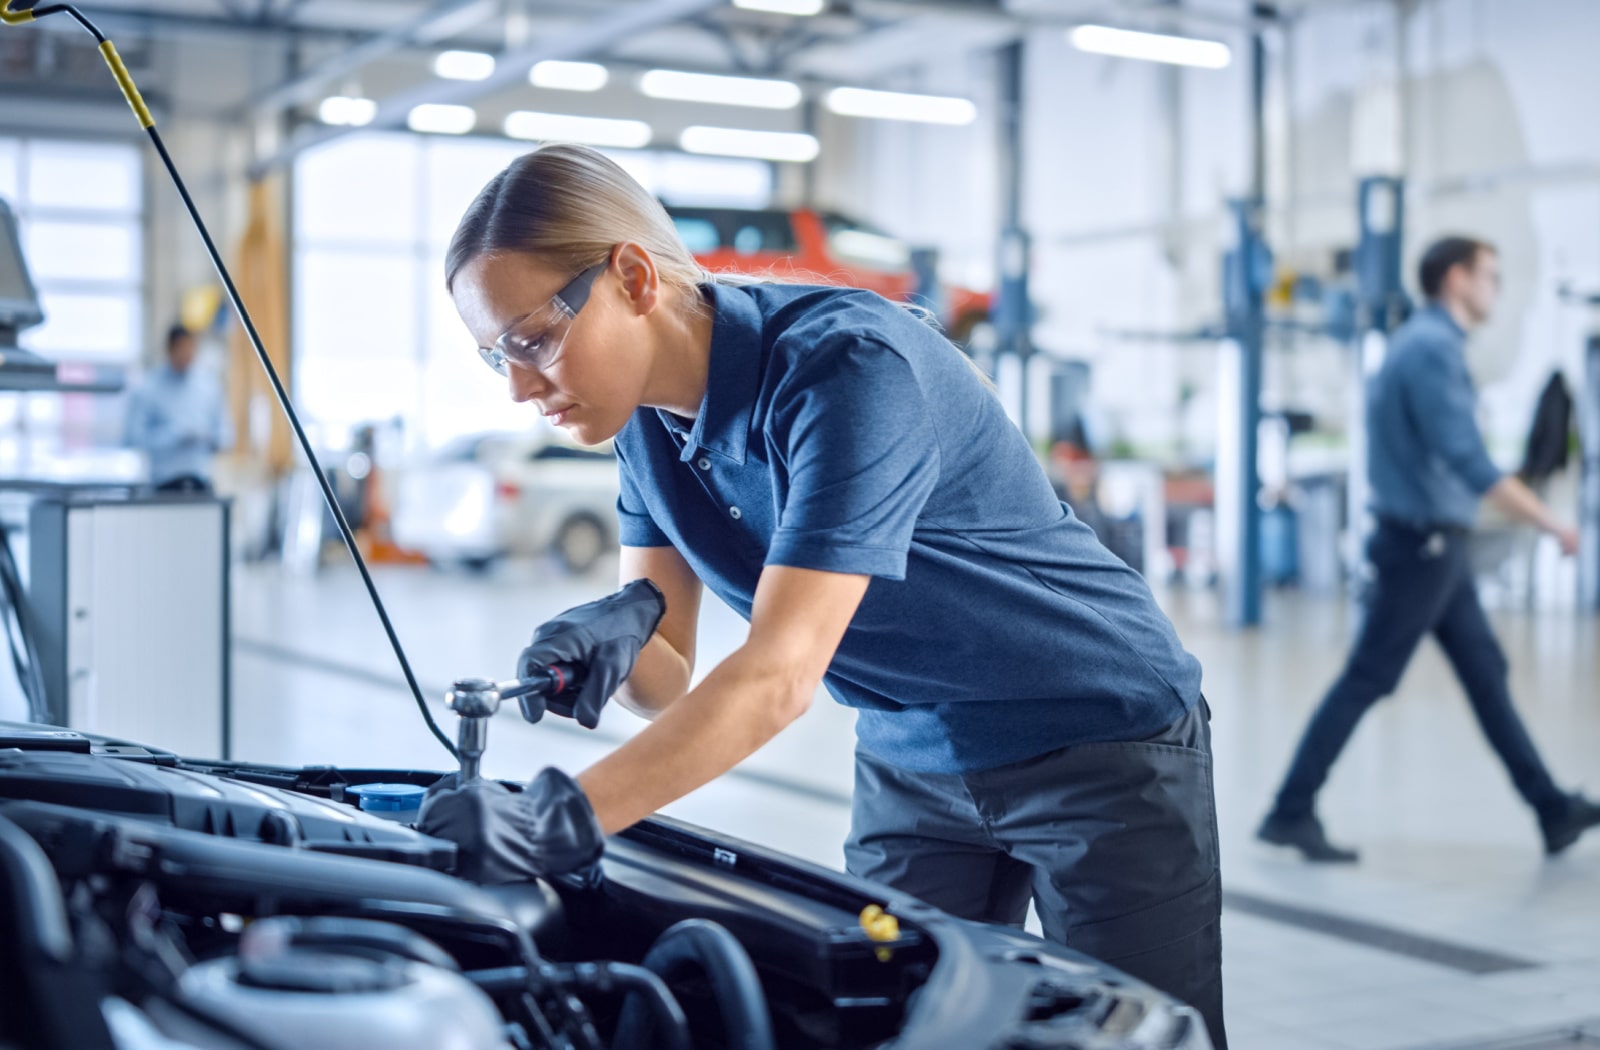 A female mechanic working on a car and wearing prescription safety glasses